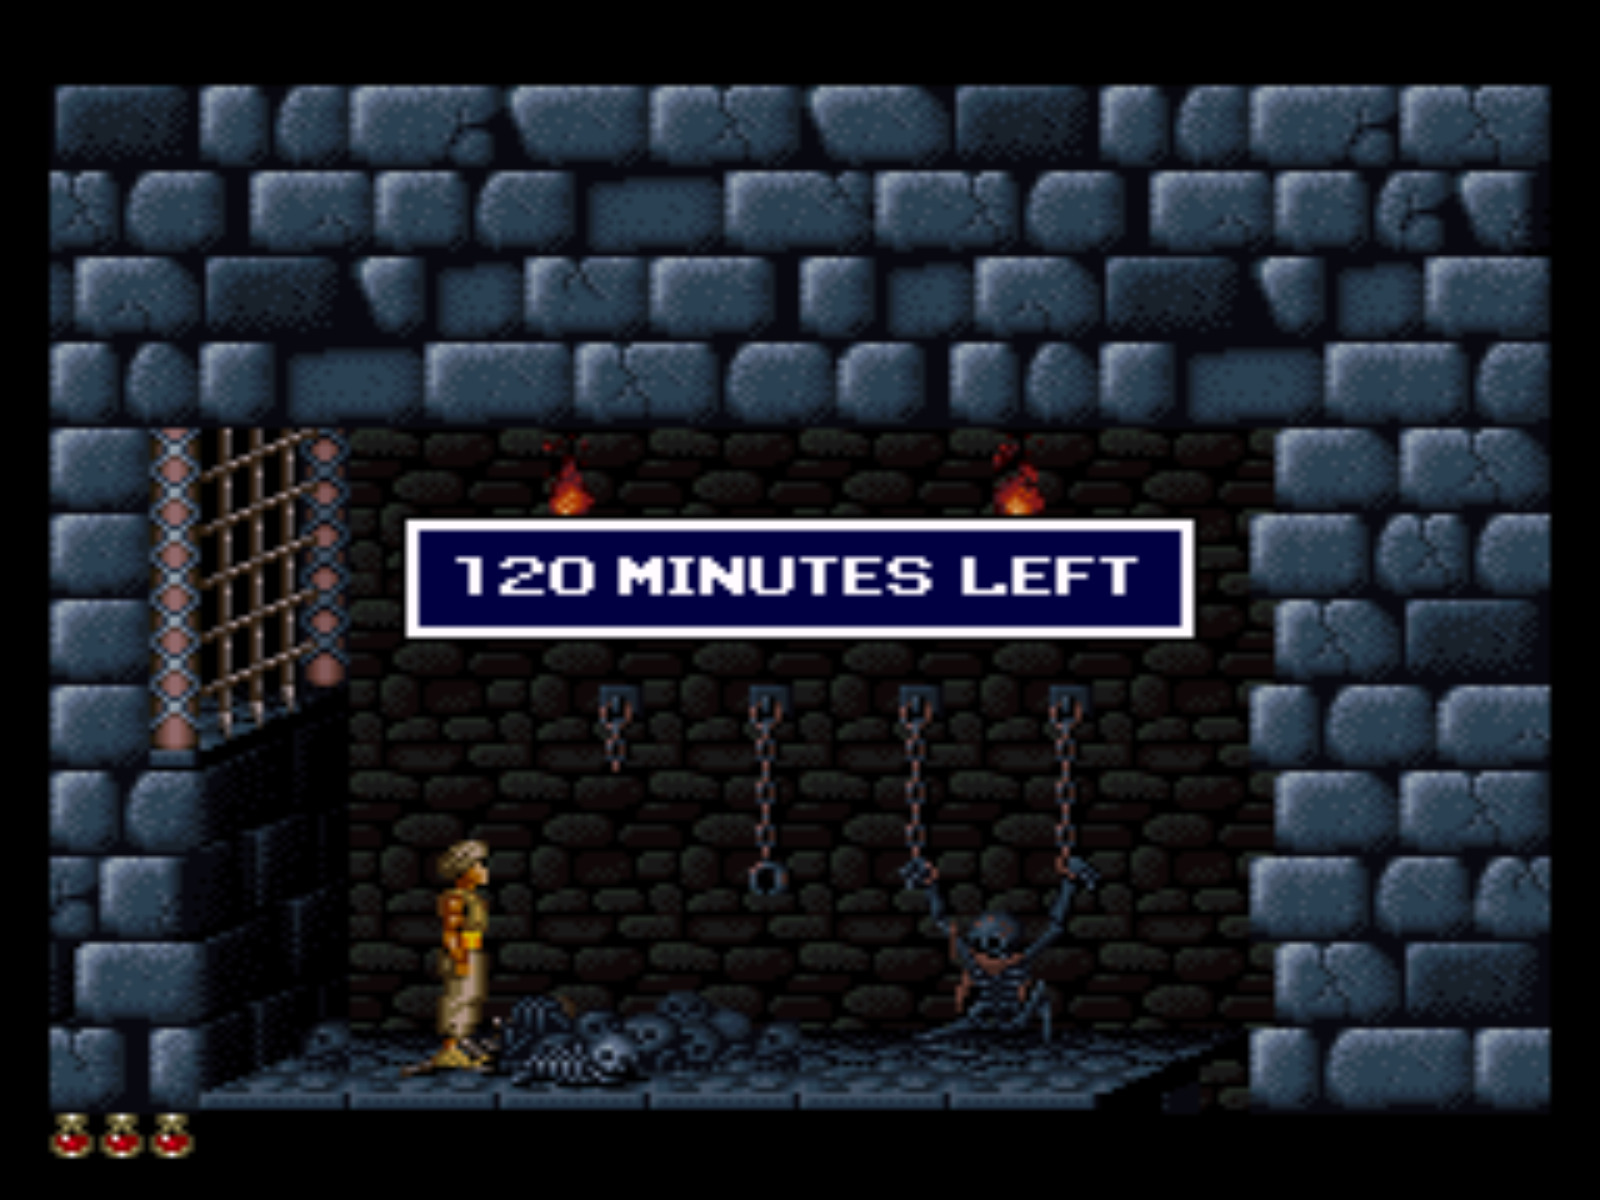 prince of persia (1989 video game)